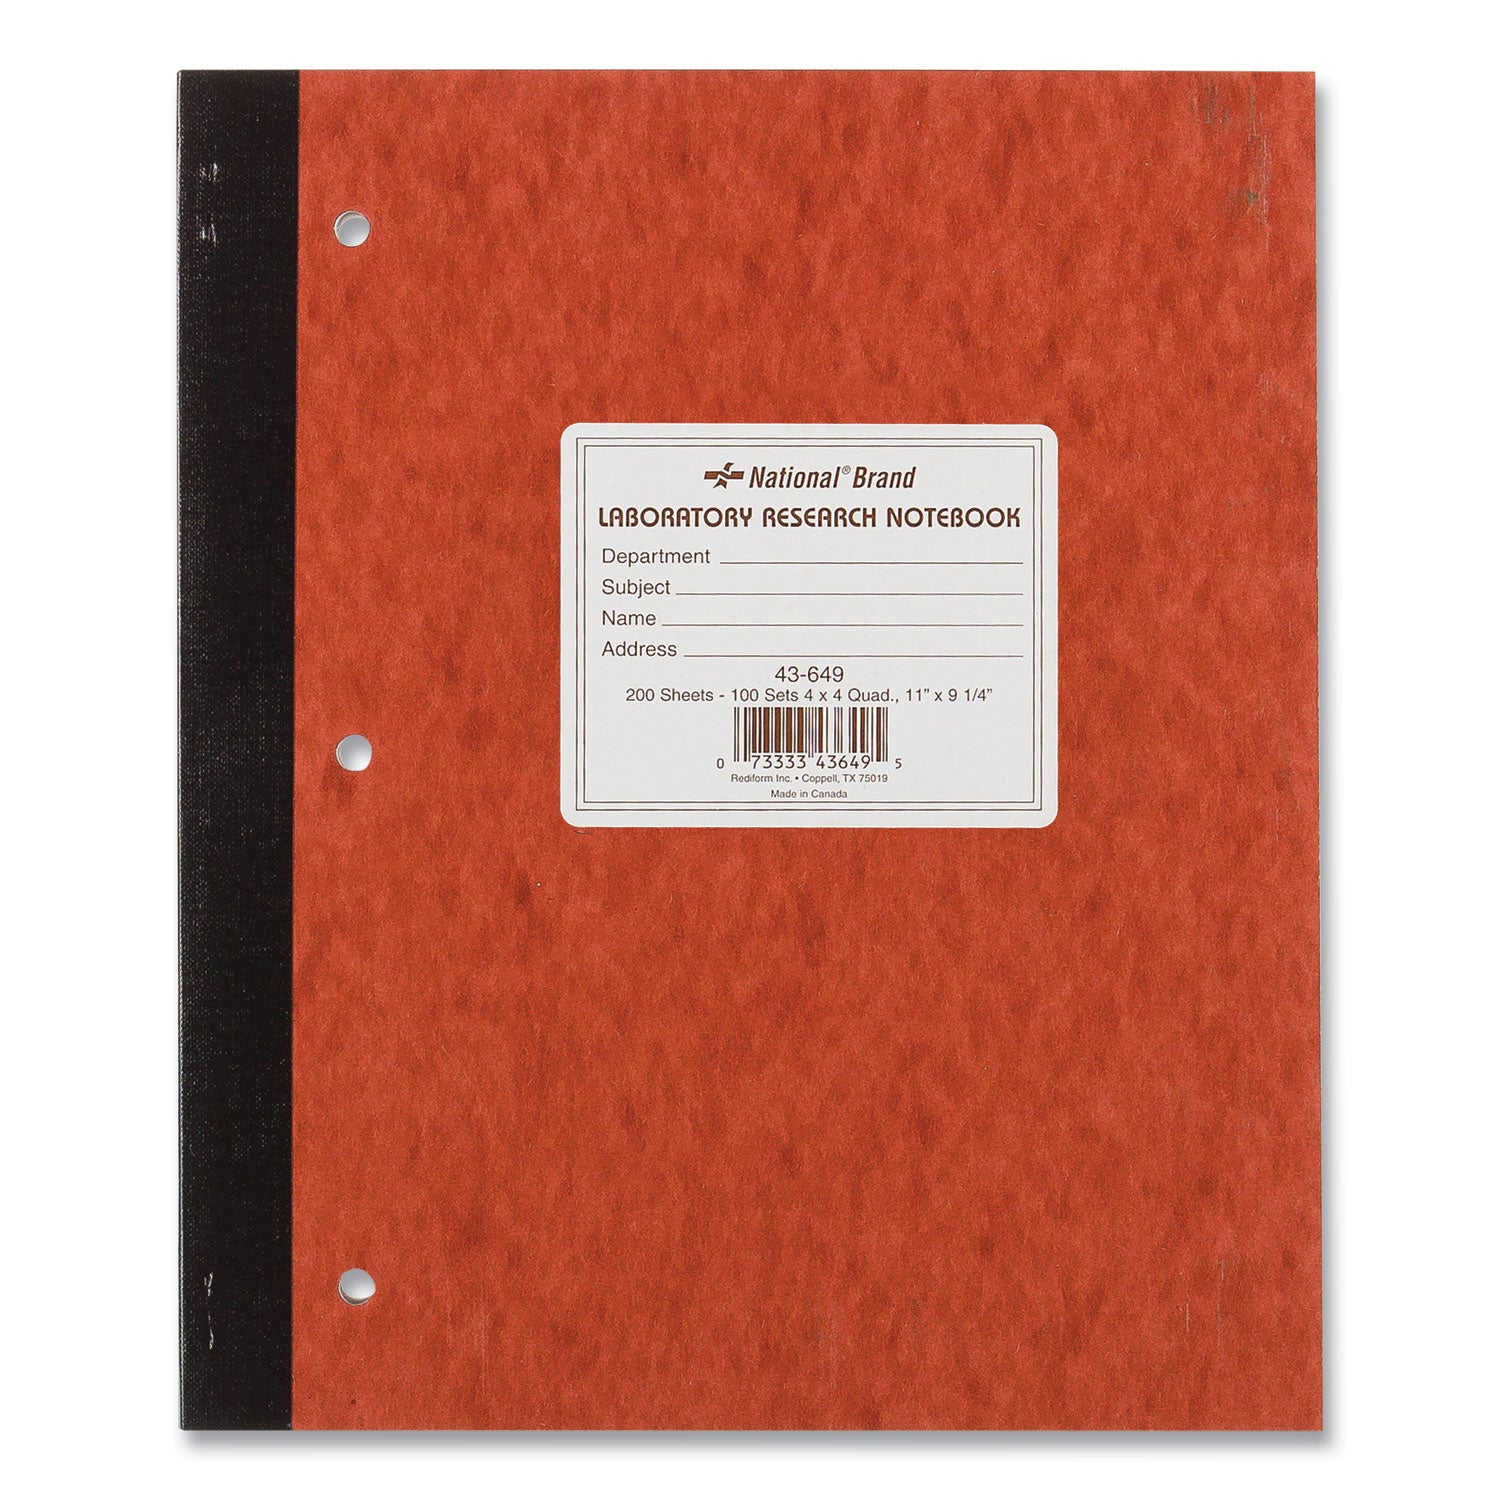 Duplicate Laboratory Notebooks, Stitched Binding, Quadrille Rule (4 sq/in), Brown Cover, (200) 11 x 9.25 Sheets - 